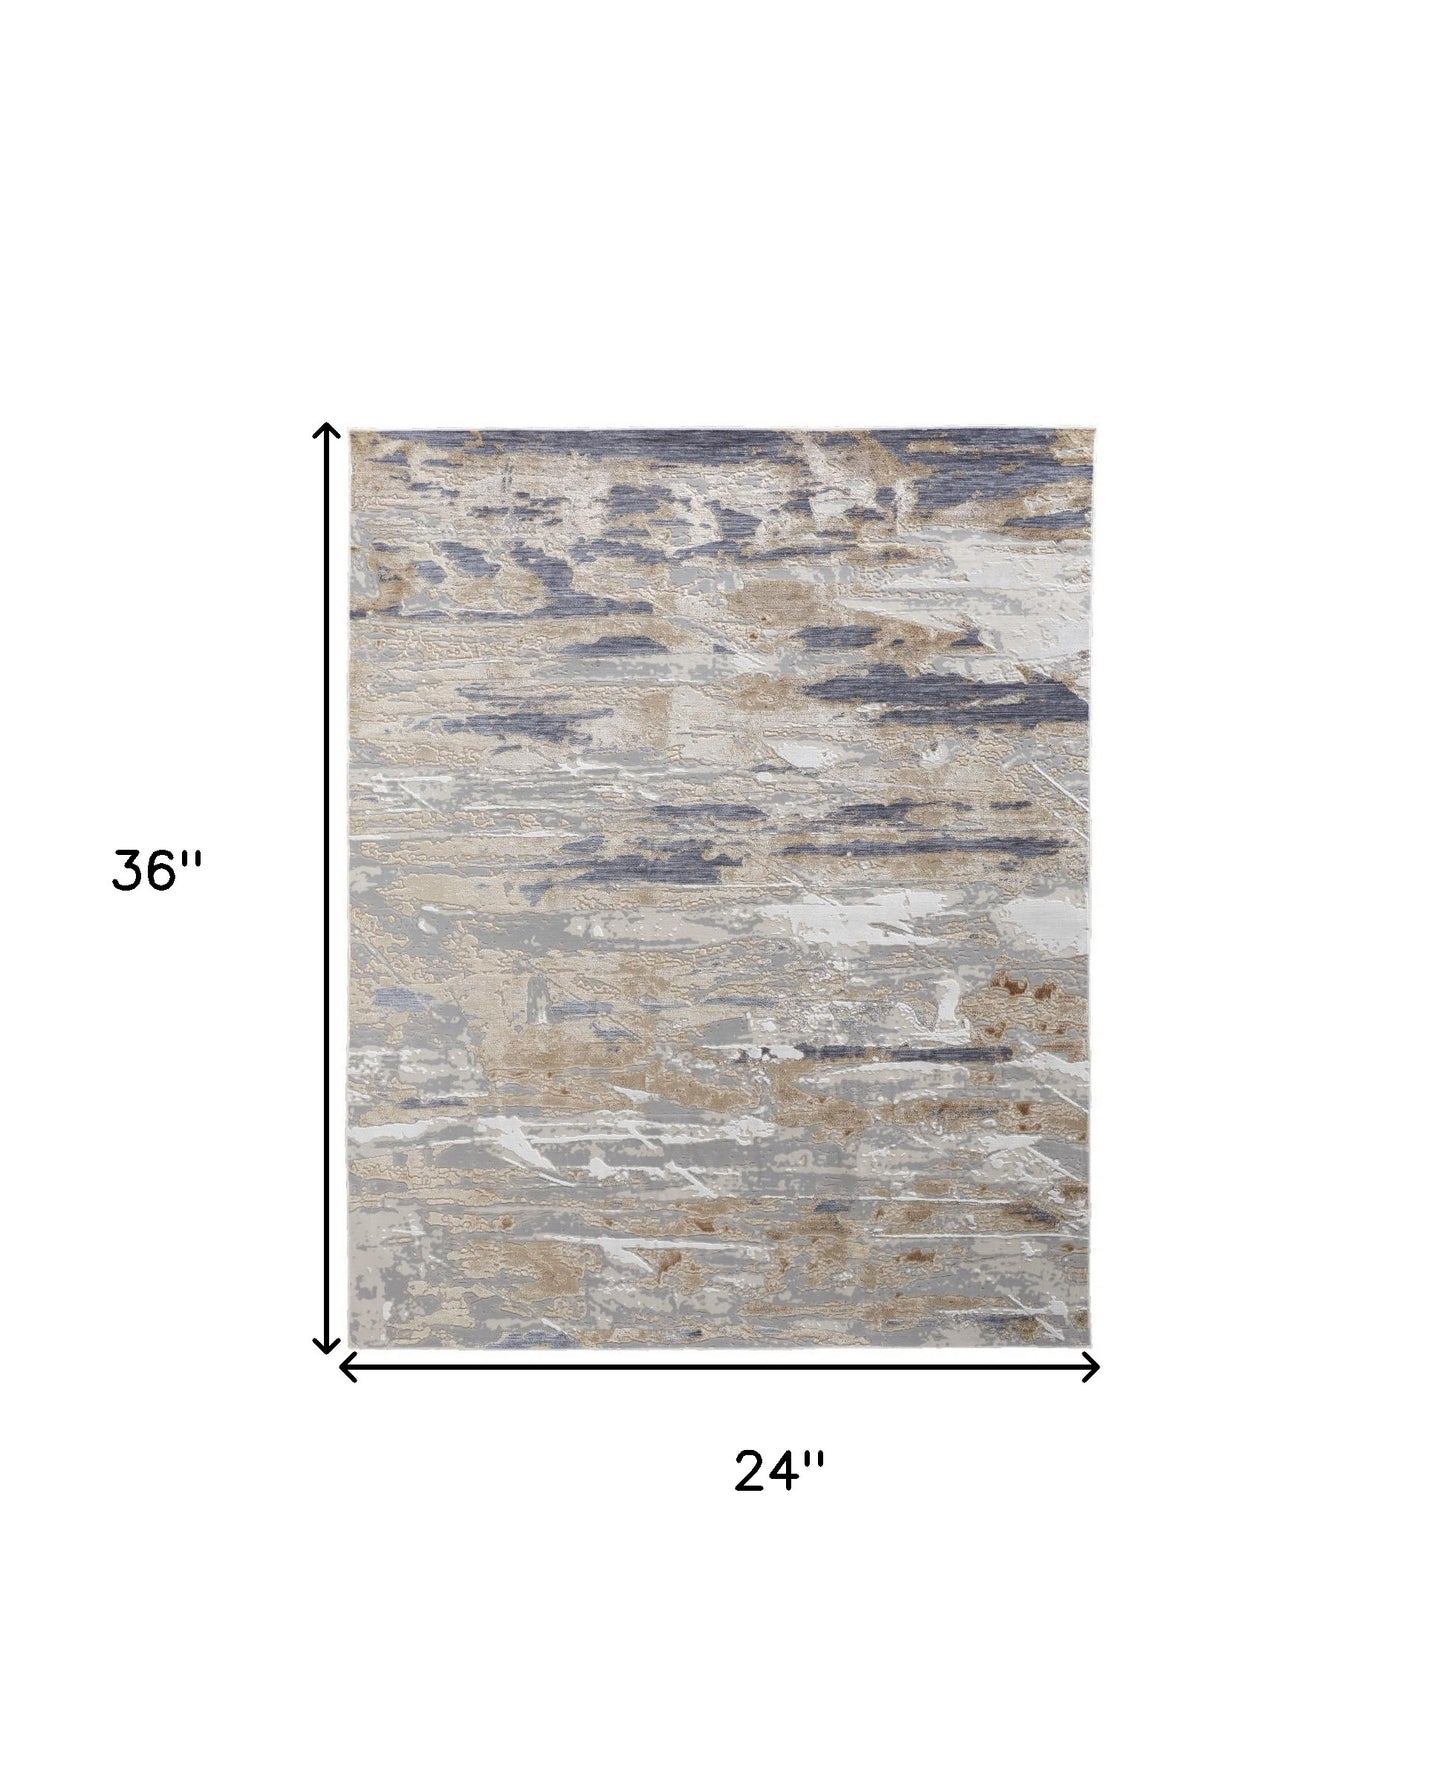 5' X 8' Tan Orange And Ivory Abstract Power Loom Distressed Area Rug